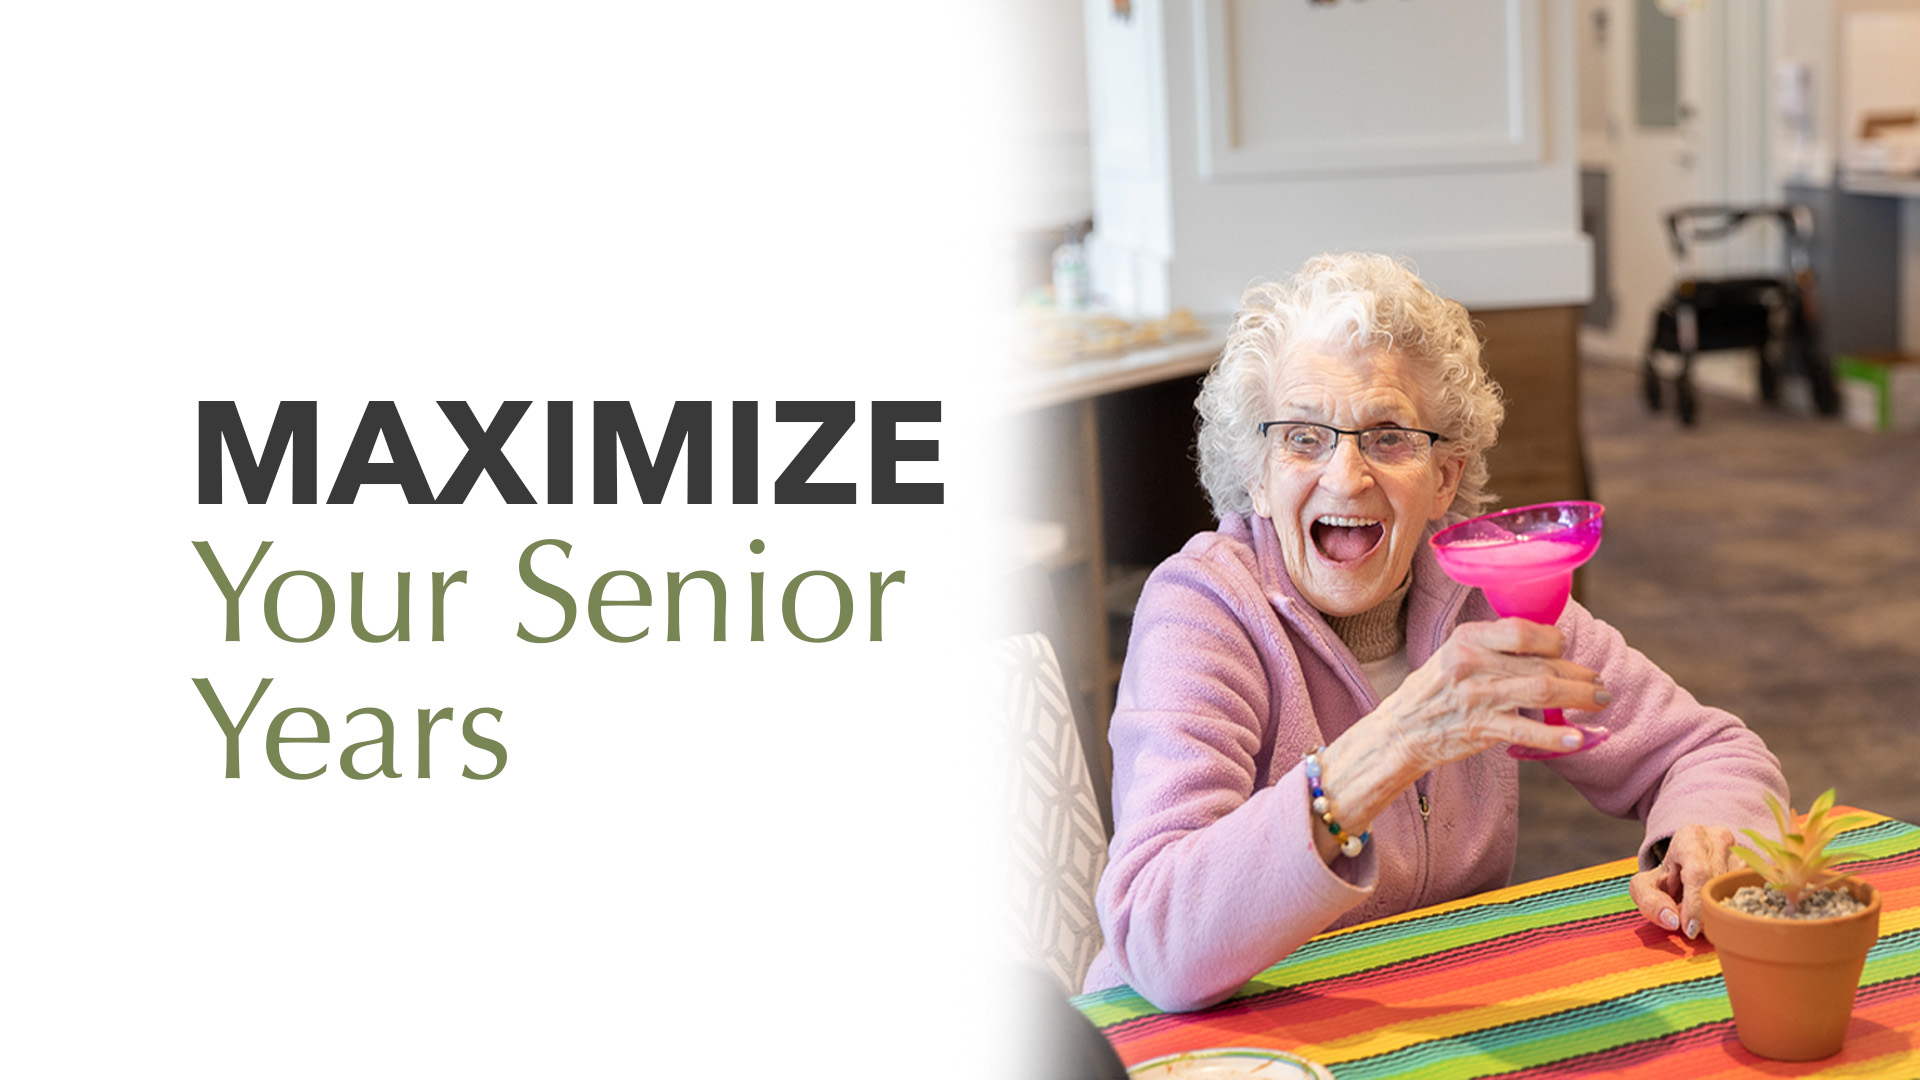 Senior laughing and enjoying a drink. The text on the image reads, 